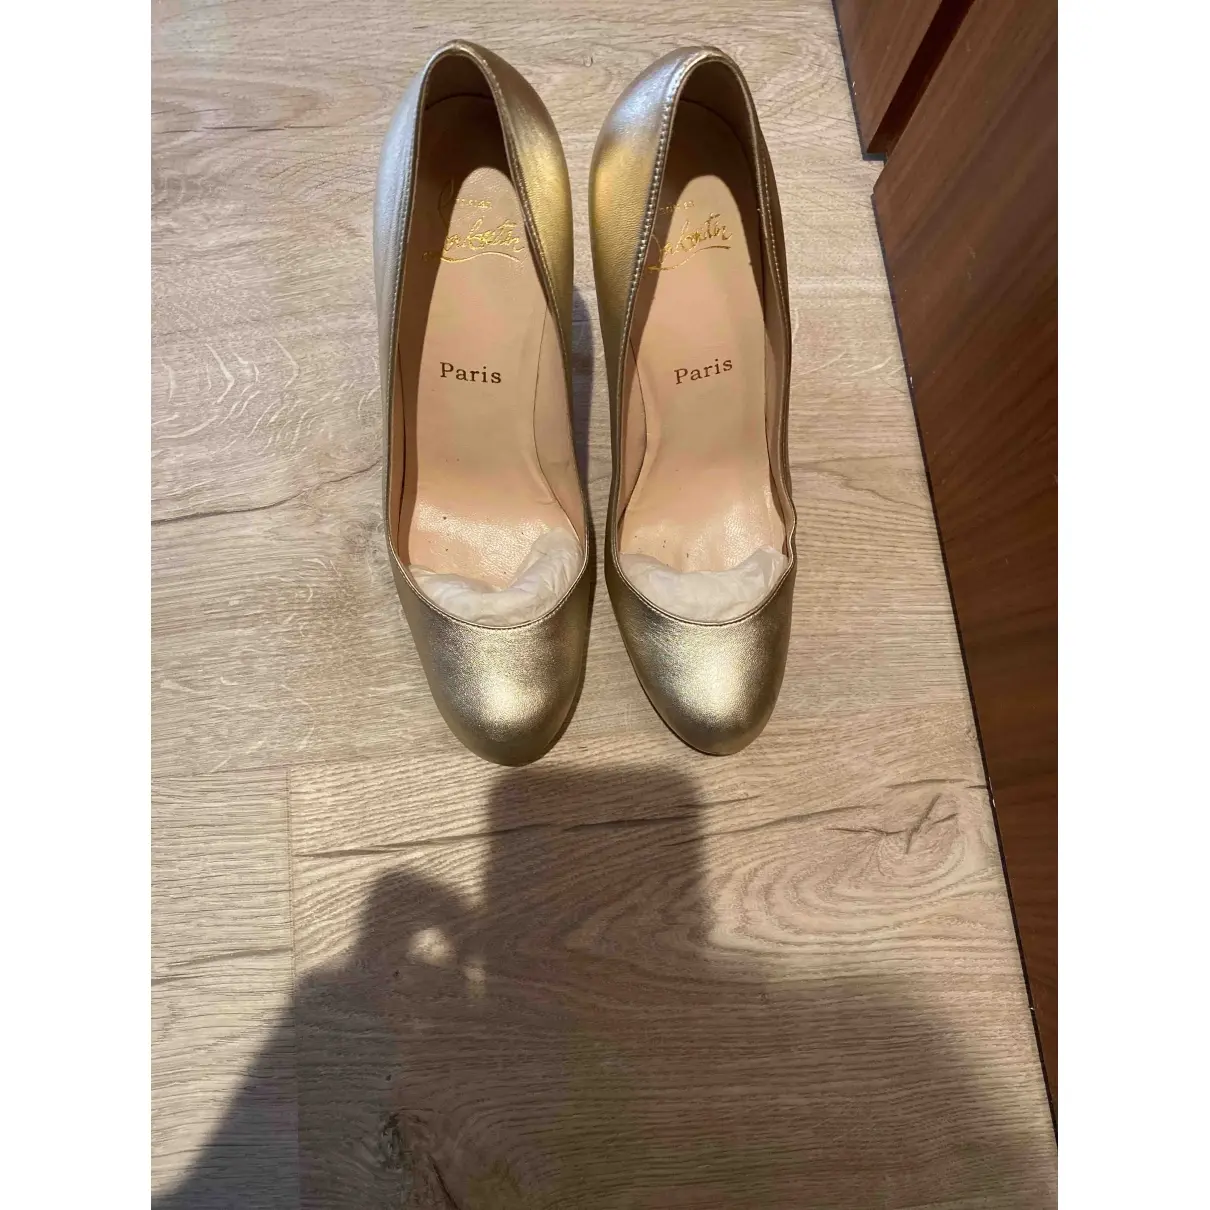 Christian Louboutin Bianca leather heels for sale